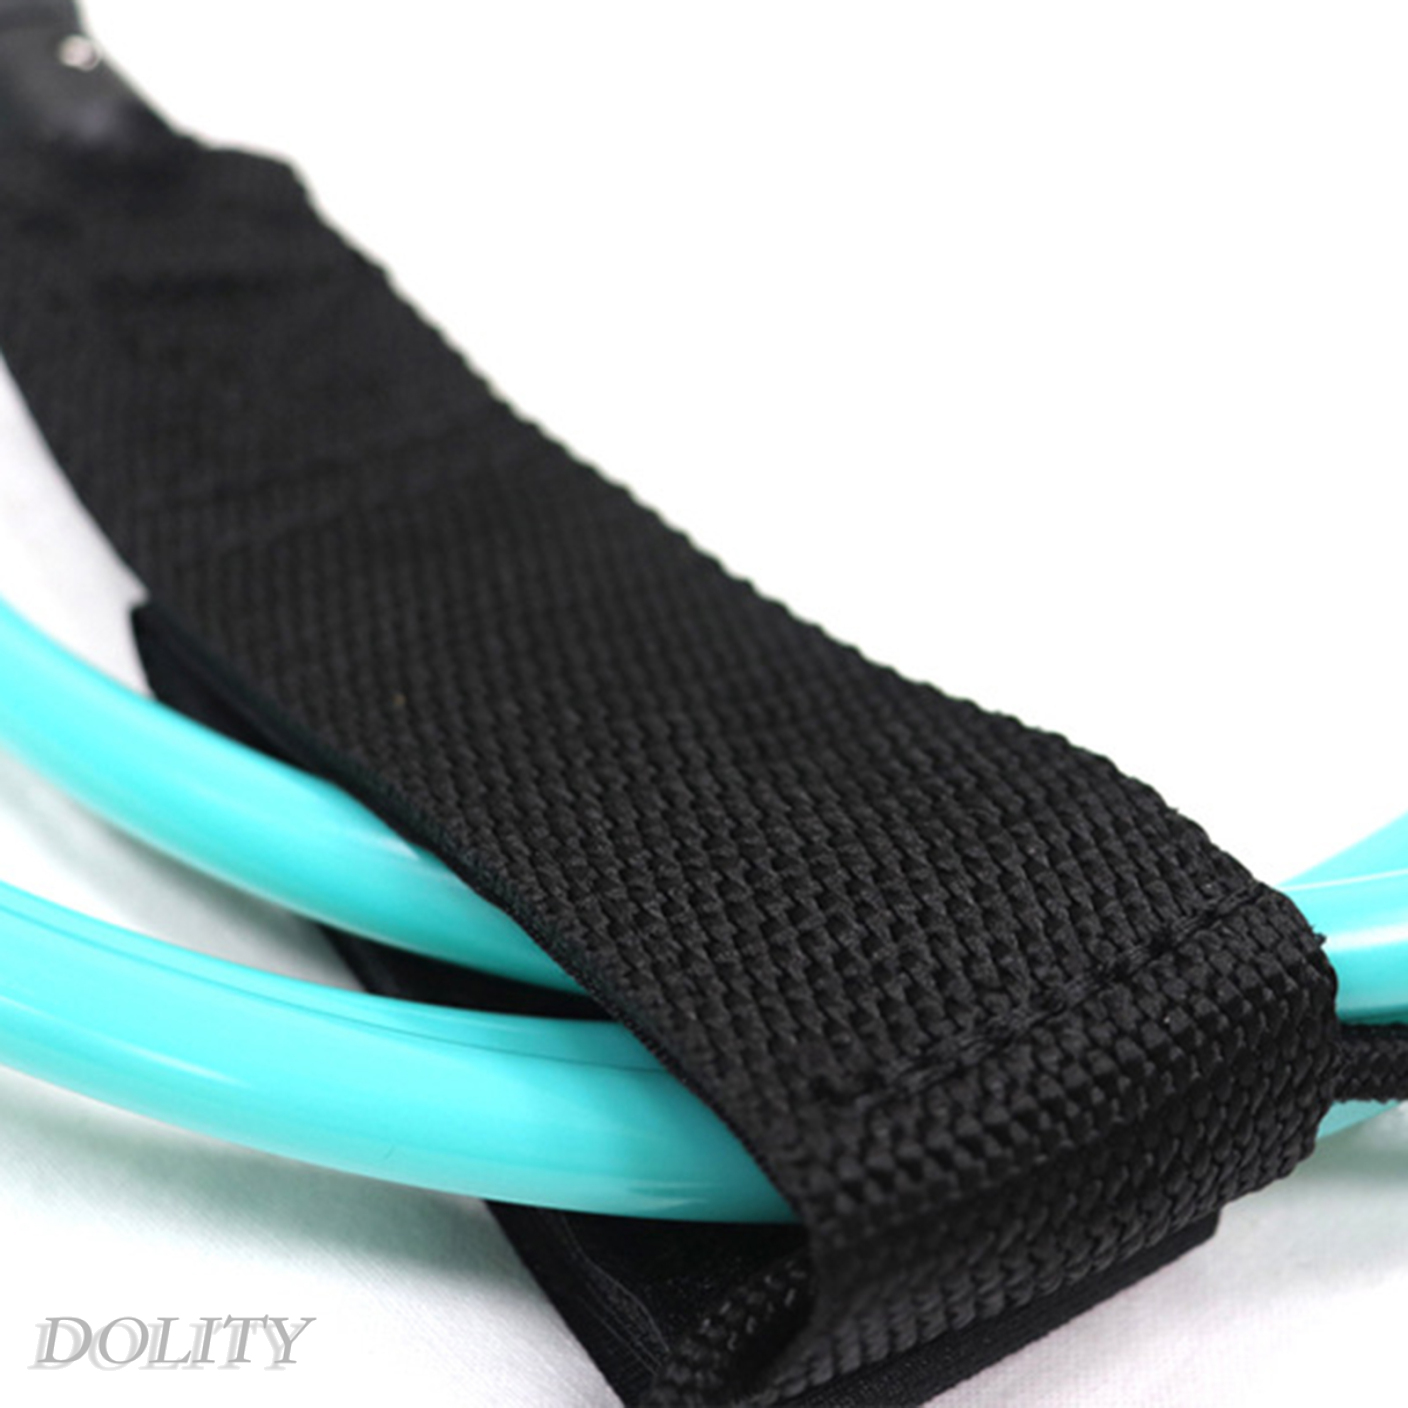 [DOLITY]10 Feet Surfing Ankle Leash Stand Up Board Leg Rope Leg Wrists Tether Cord